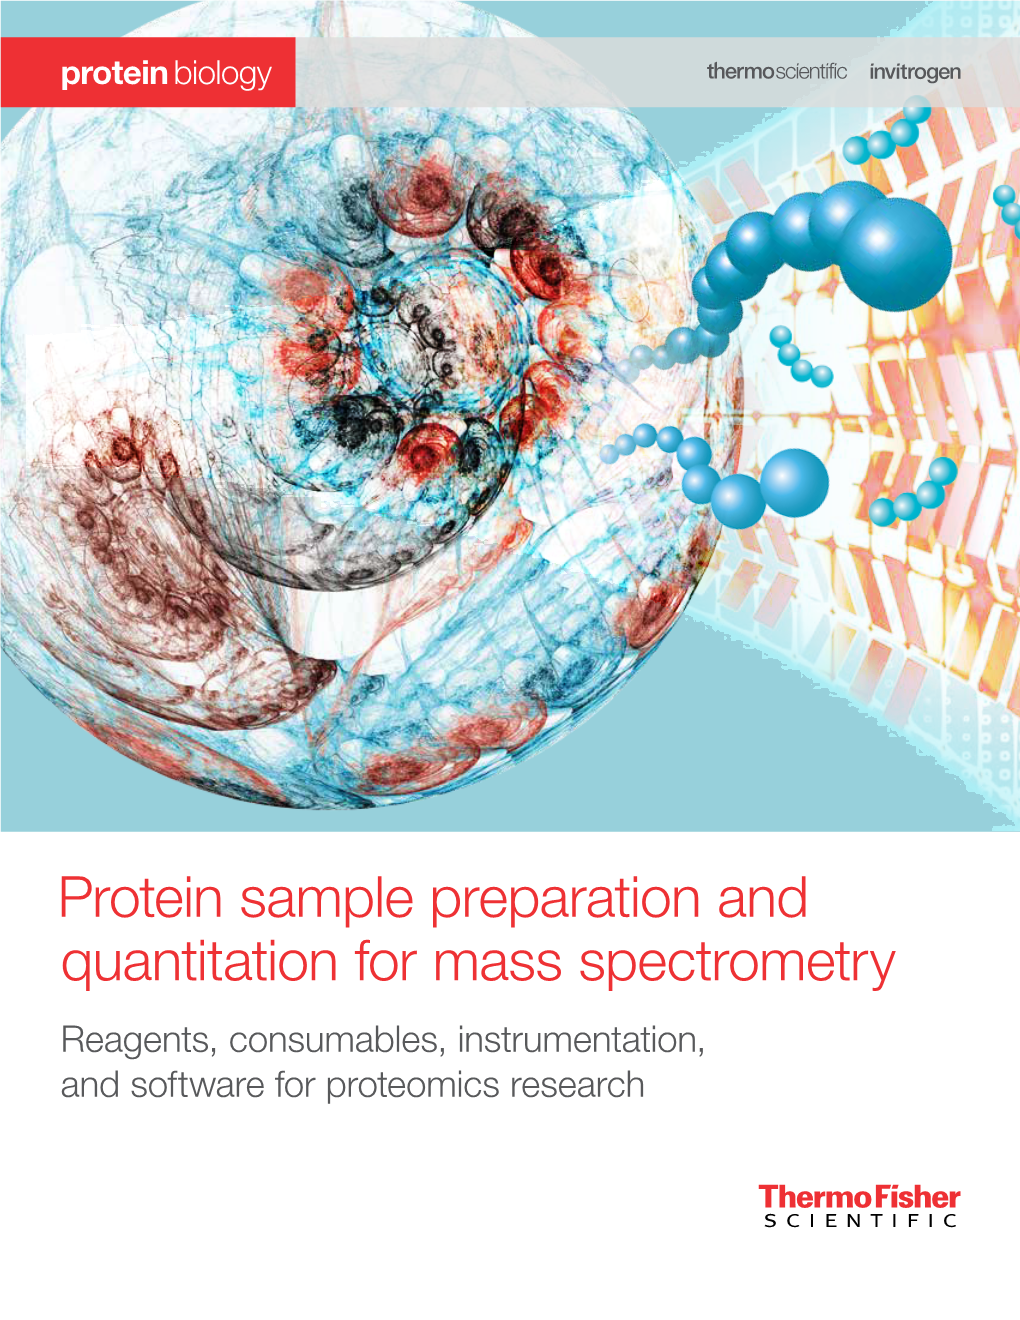 Protein Sample Preparation and Quantitation for Mass Spectrometry Reagents, Consumables, Instrumentation, and Software for Proteomics Research Contents